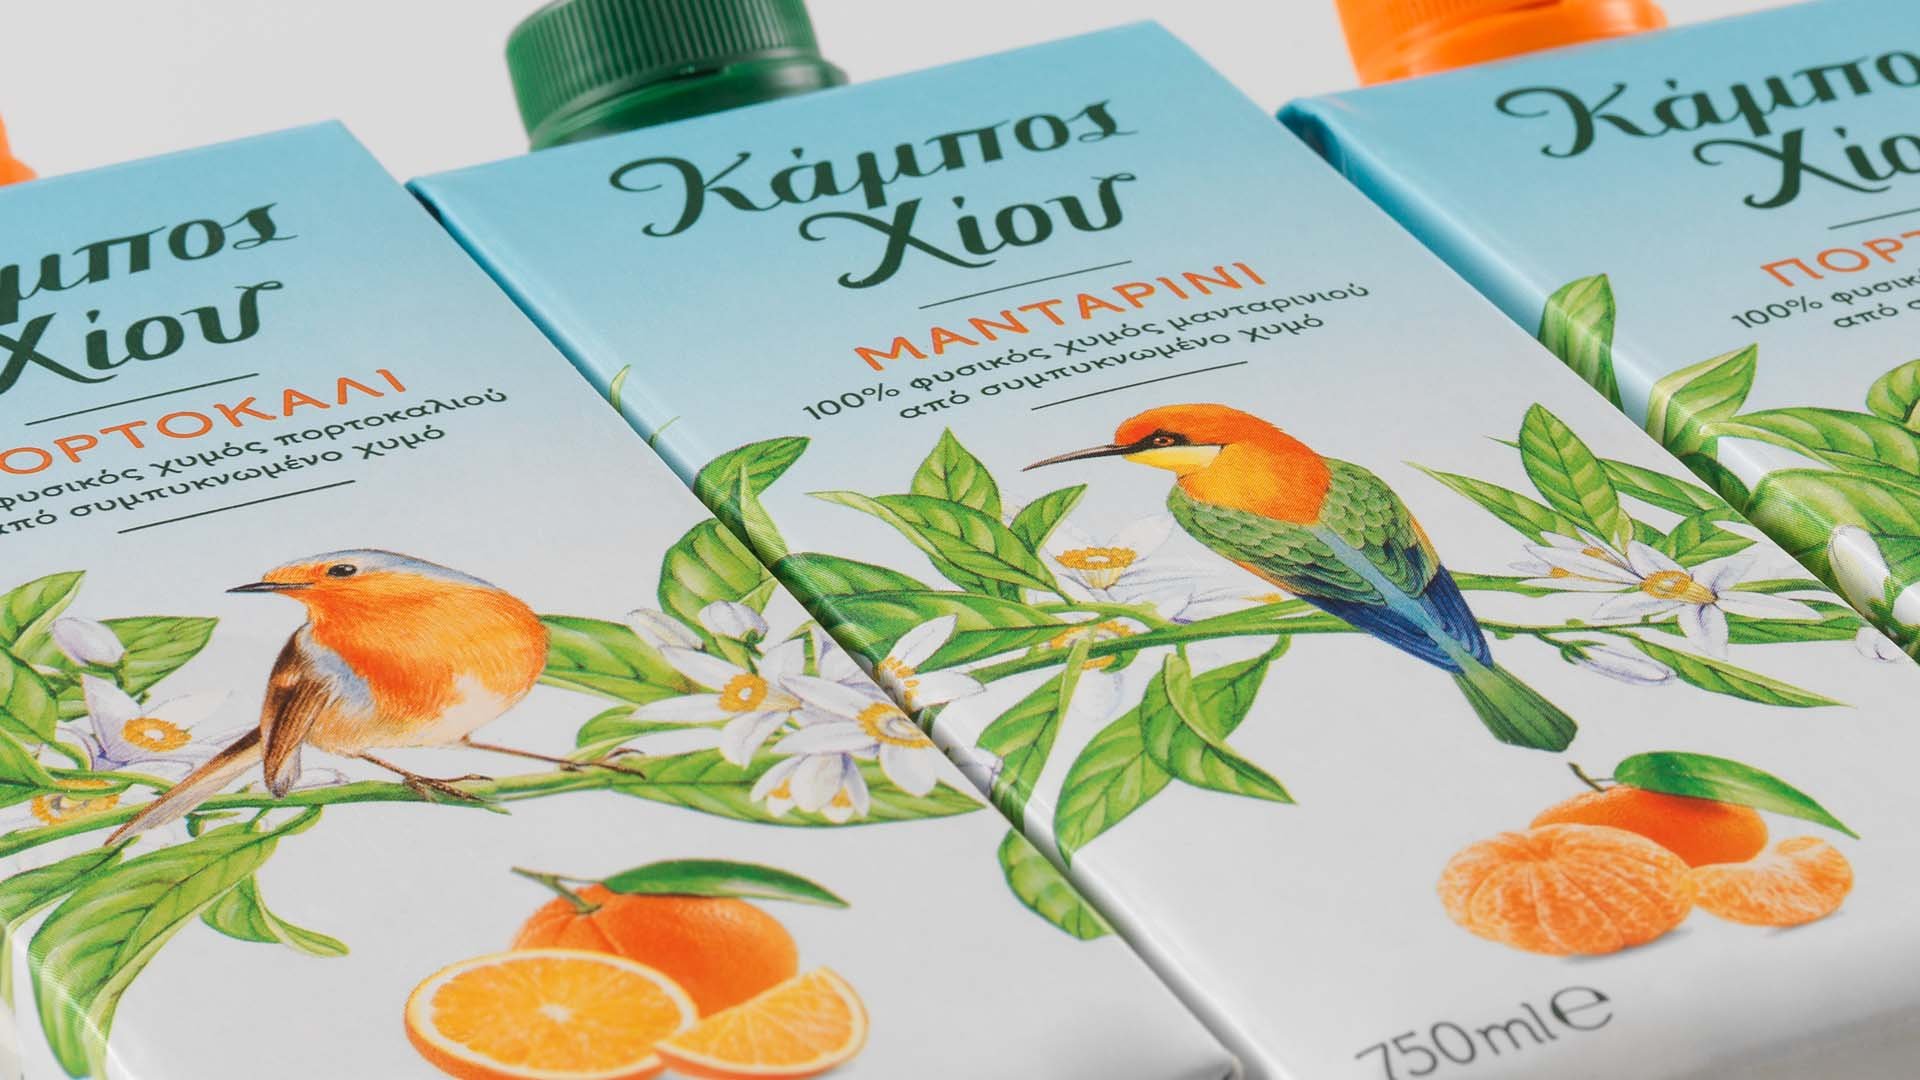 Close up photo on the illustrated front sides of Tetra Pak containers of Chios Gardens natural juices, with illustrations of various birds sitting on citrus tree branches